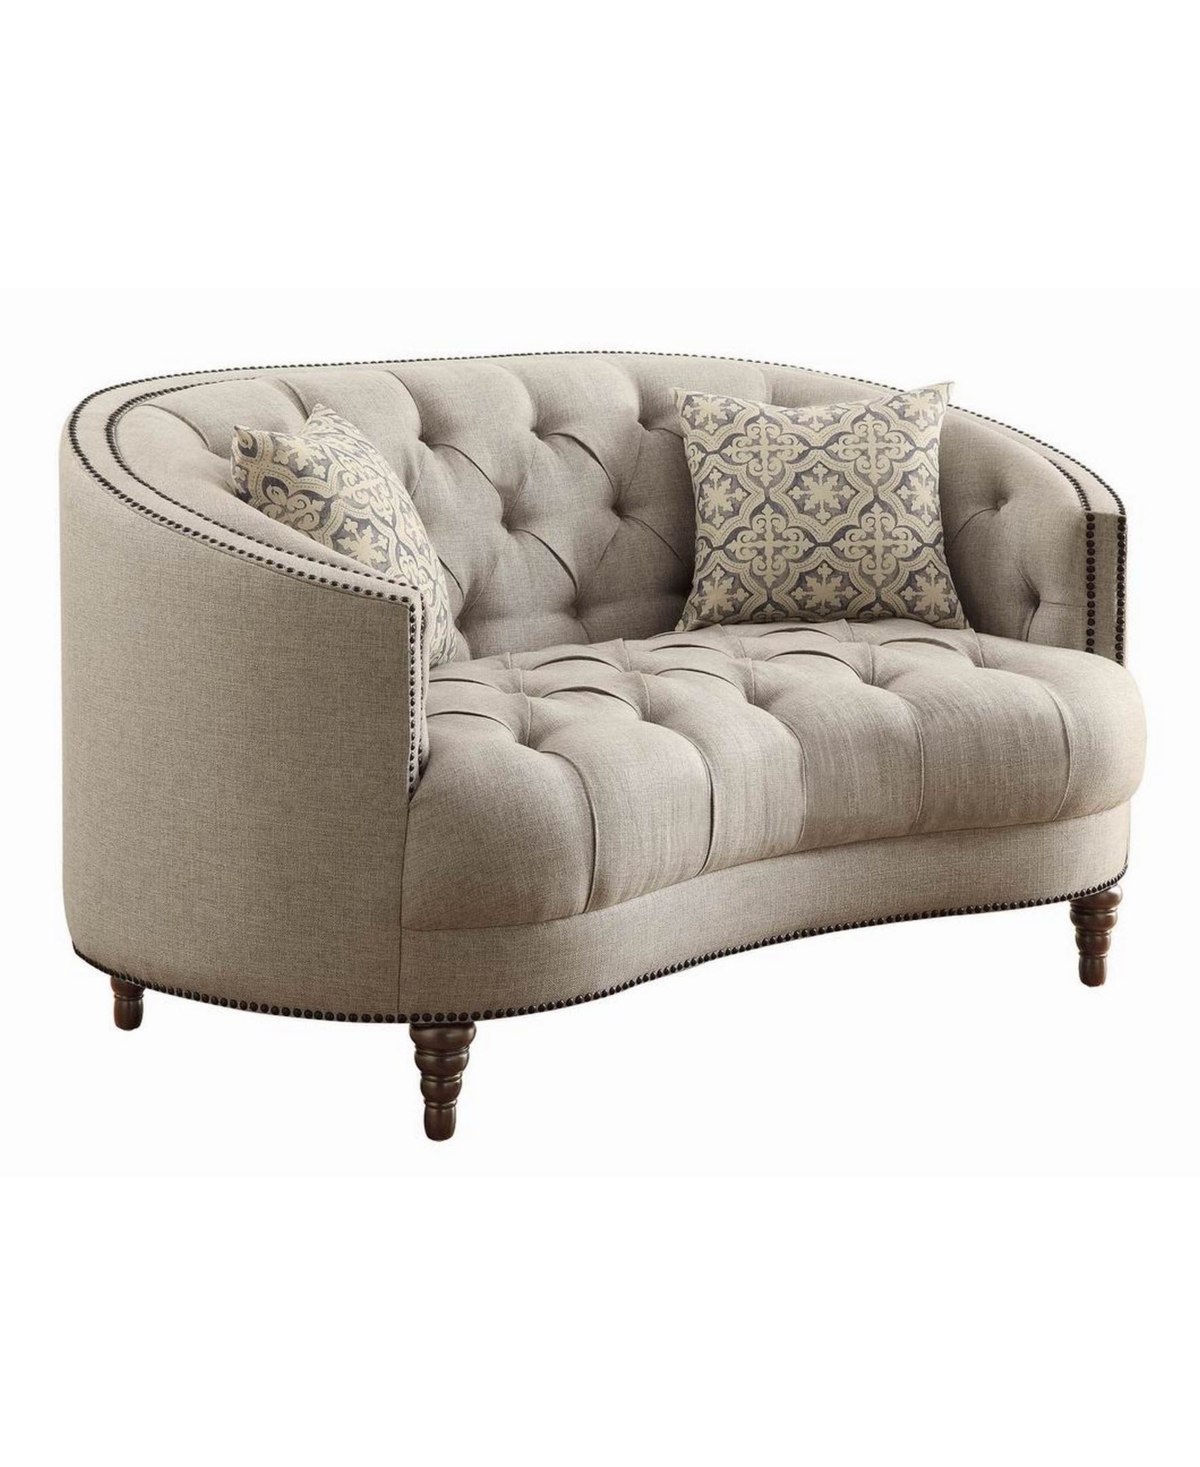 Coaster Home Furnishings Avonlea Loveseat with Button Tufting